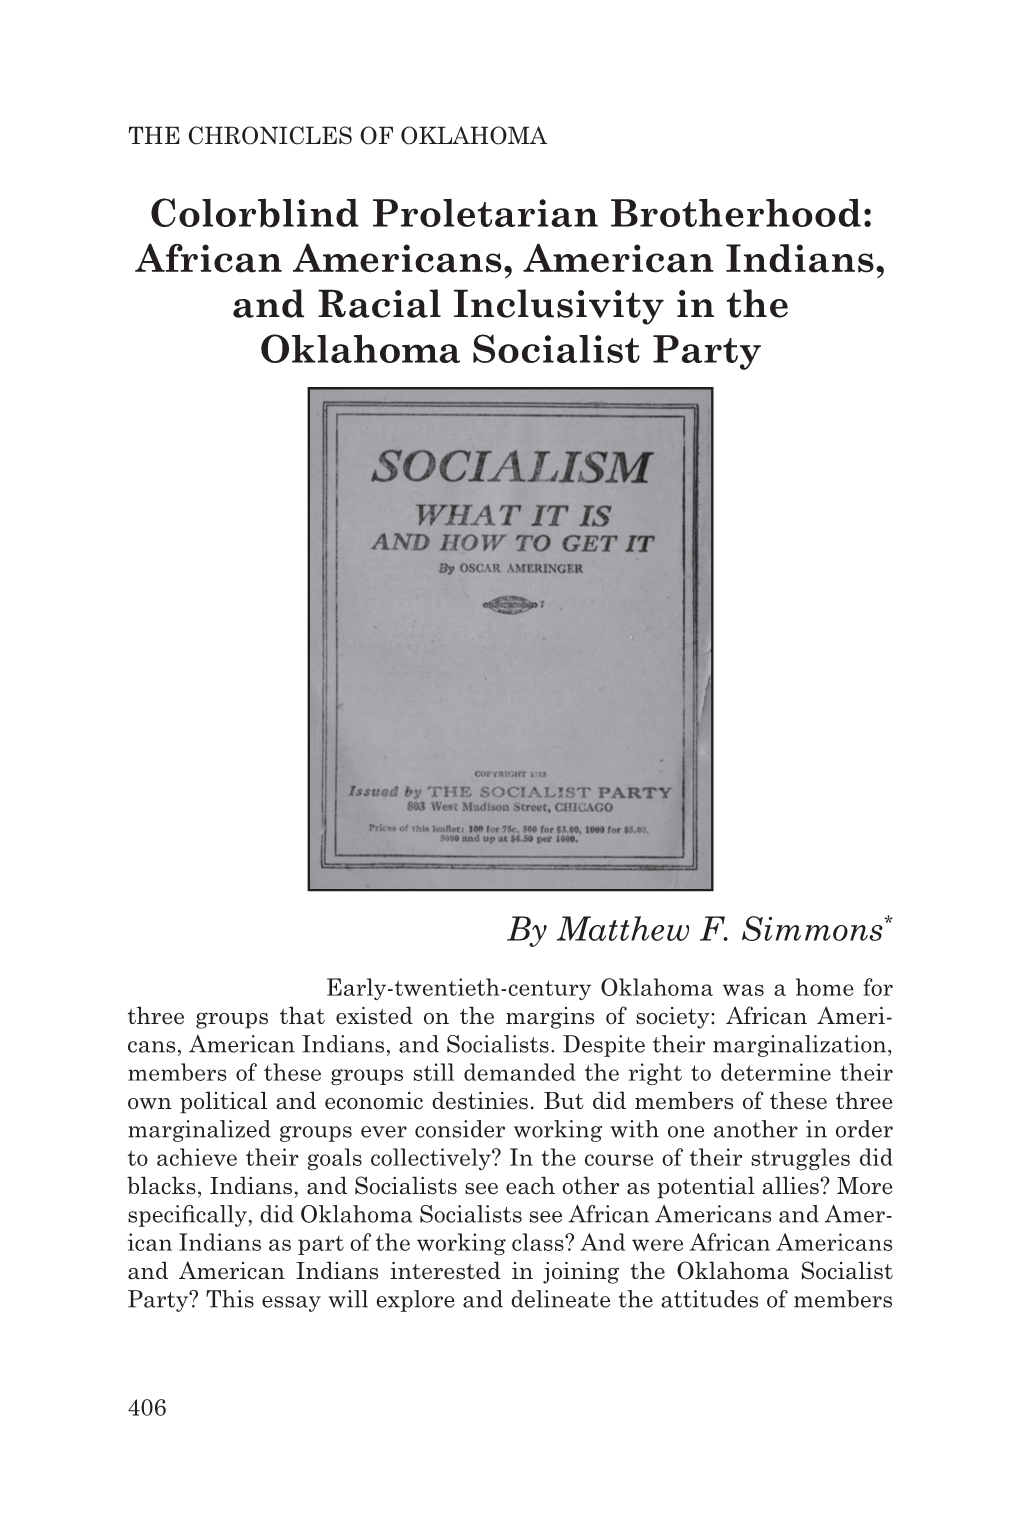 Colorblind Proletarian Brotherhood: African Americans, American Indians, and Racial Inclusivity in the Oklahoma Socialist Party